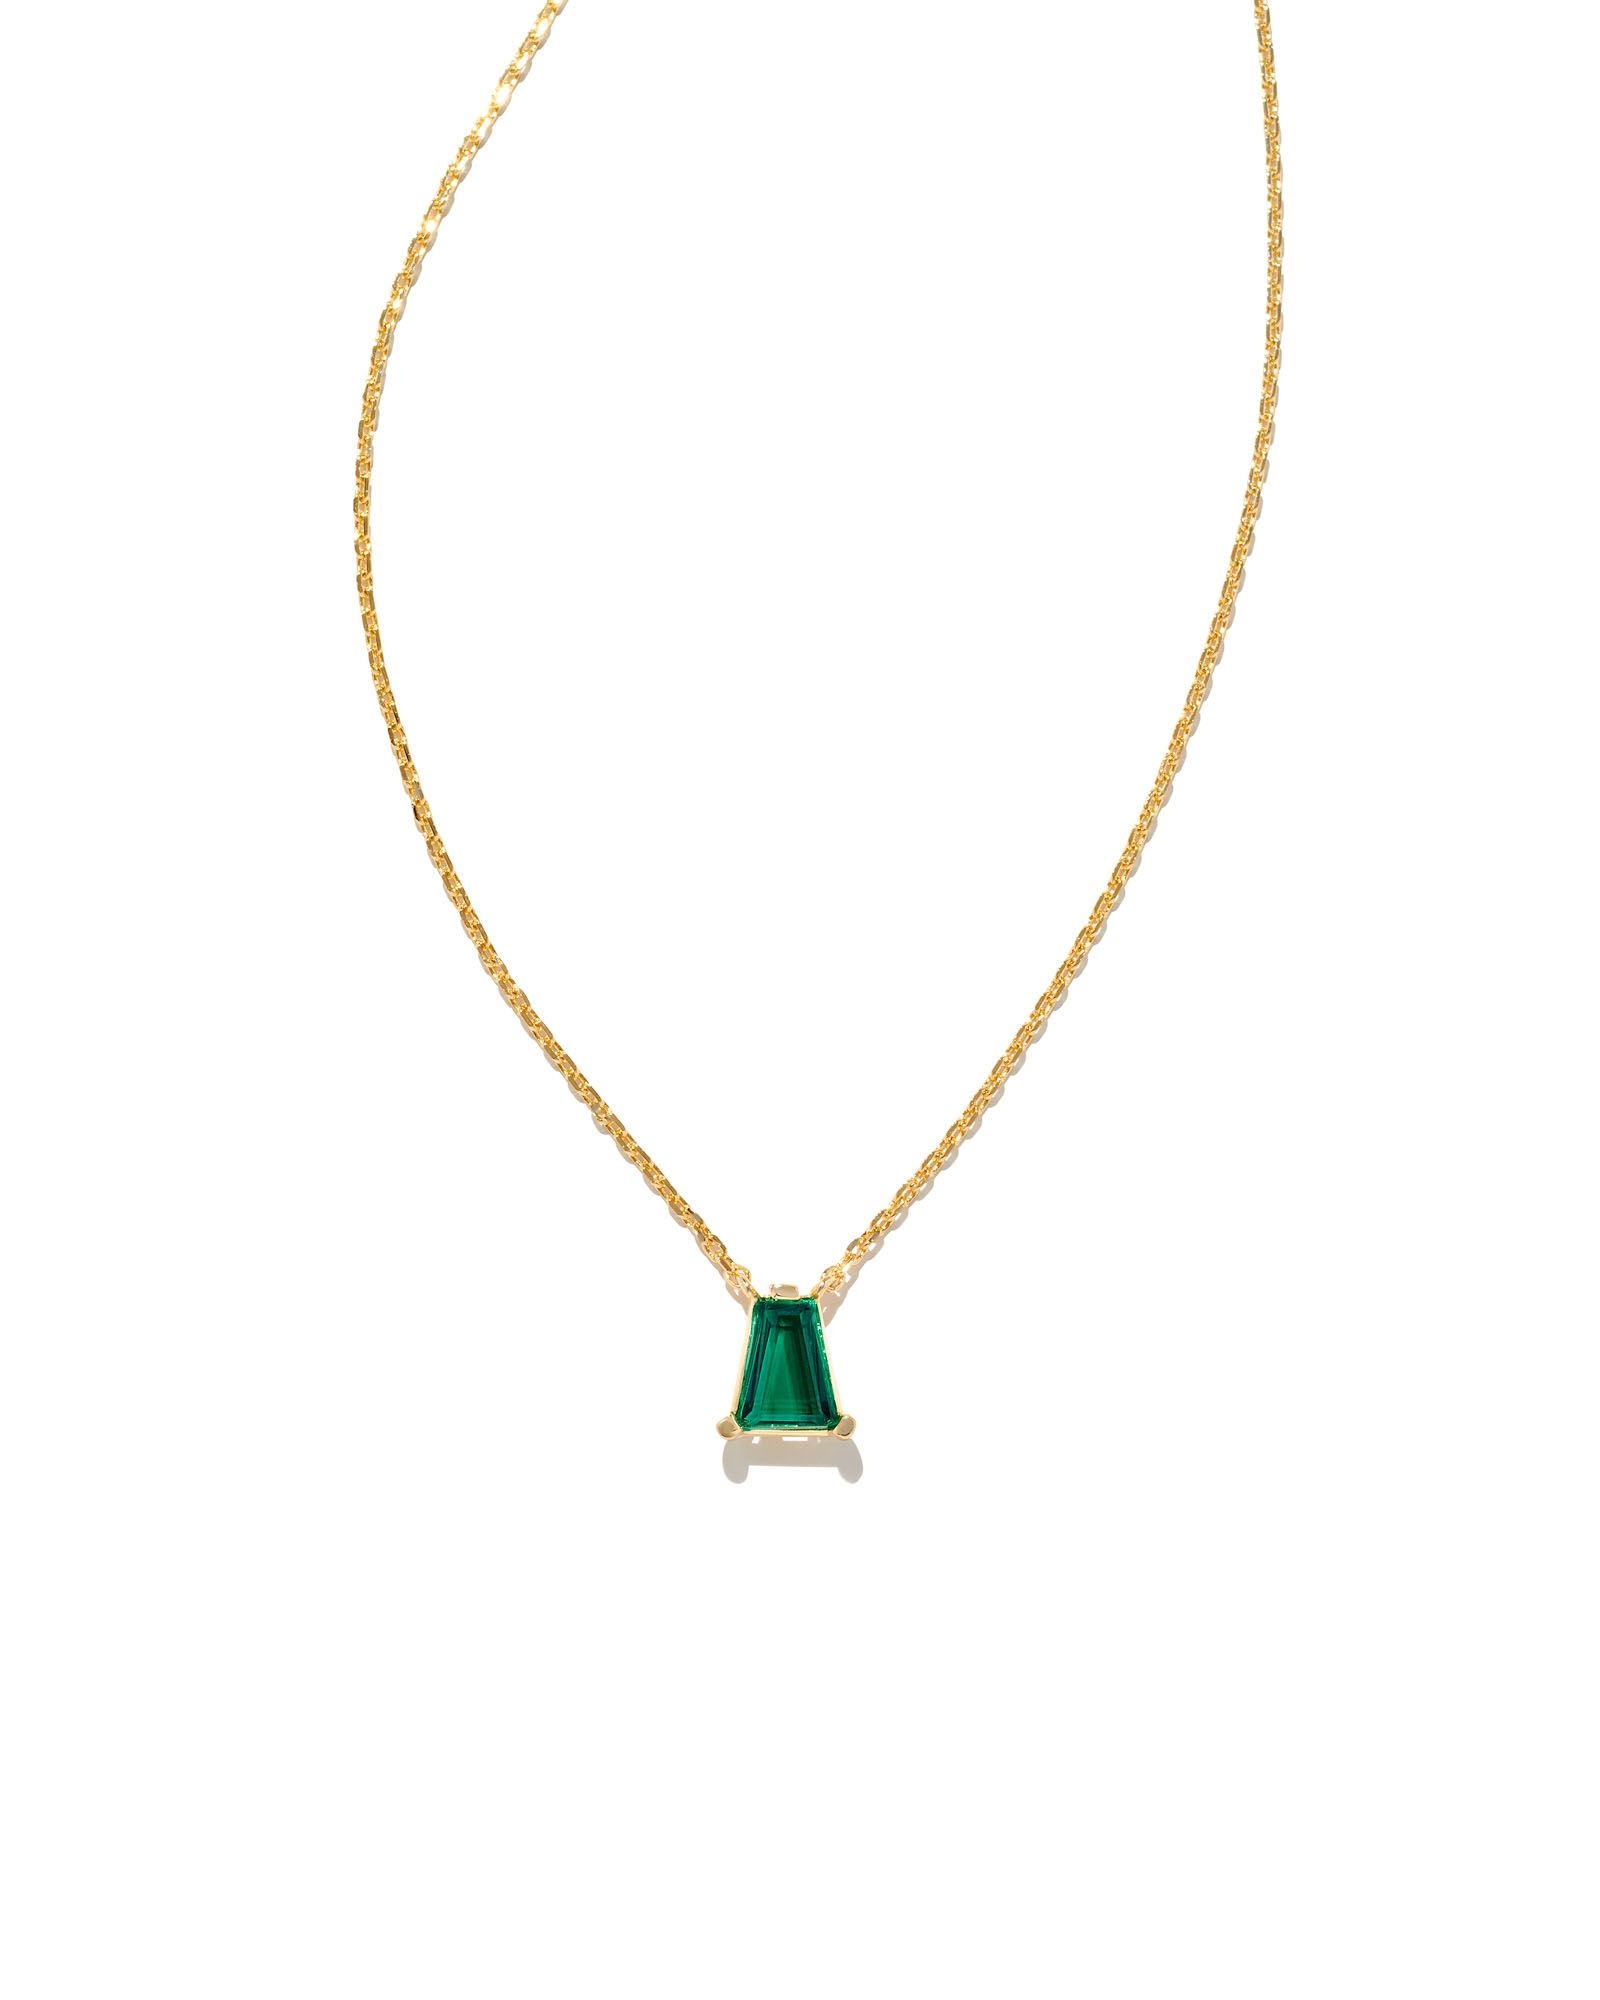 Blair Gold Pendant Necklace in Emerald Crystal | Kendra Scott